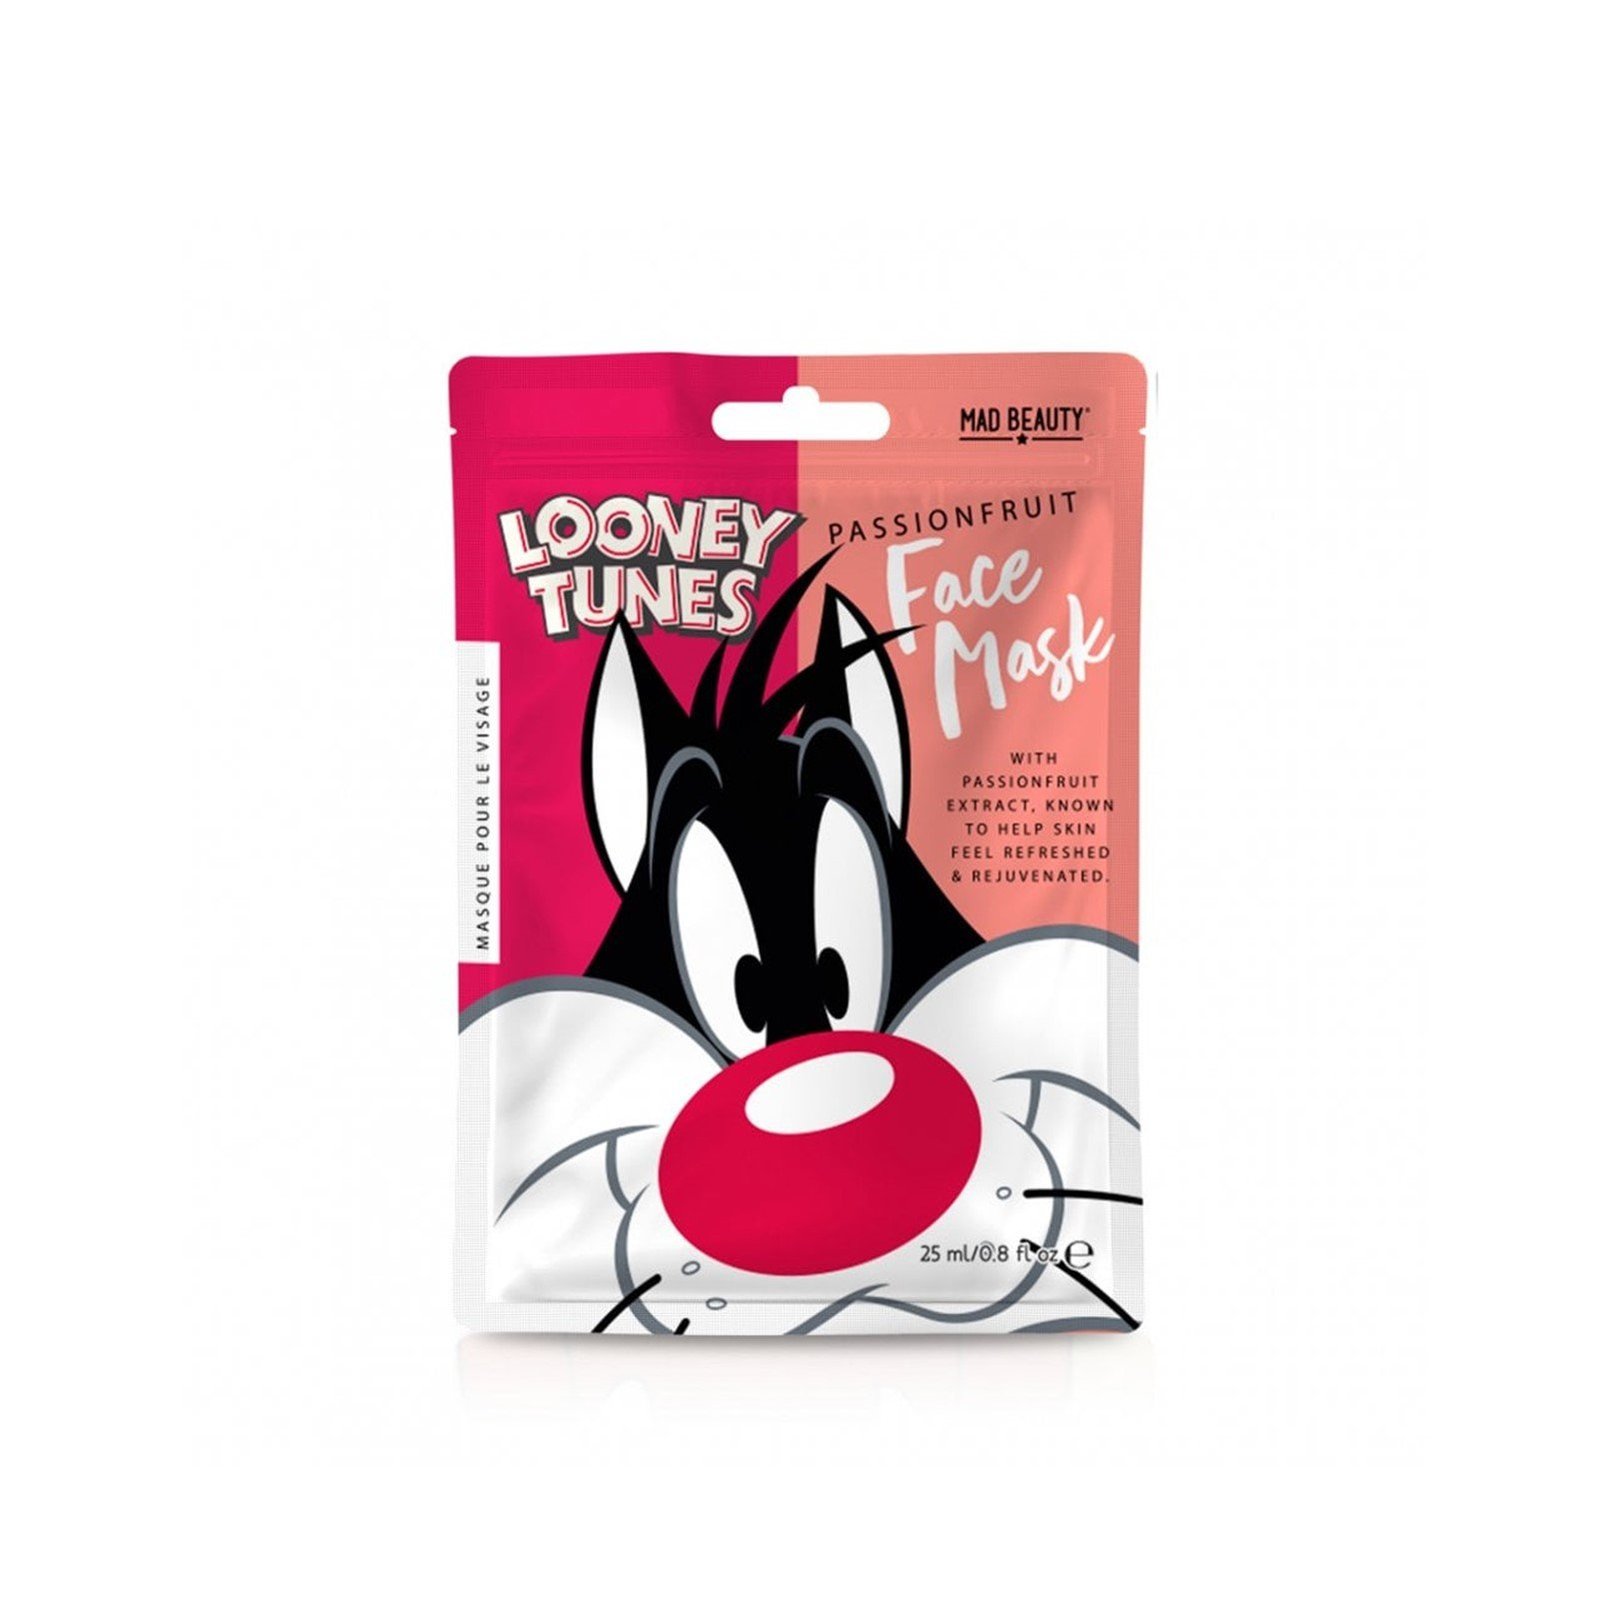 Mad Beauty Warner Brothers Looney Tunes Sylvester Sheet Face Mask 25ml